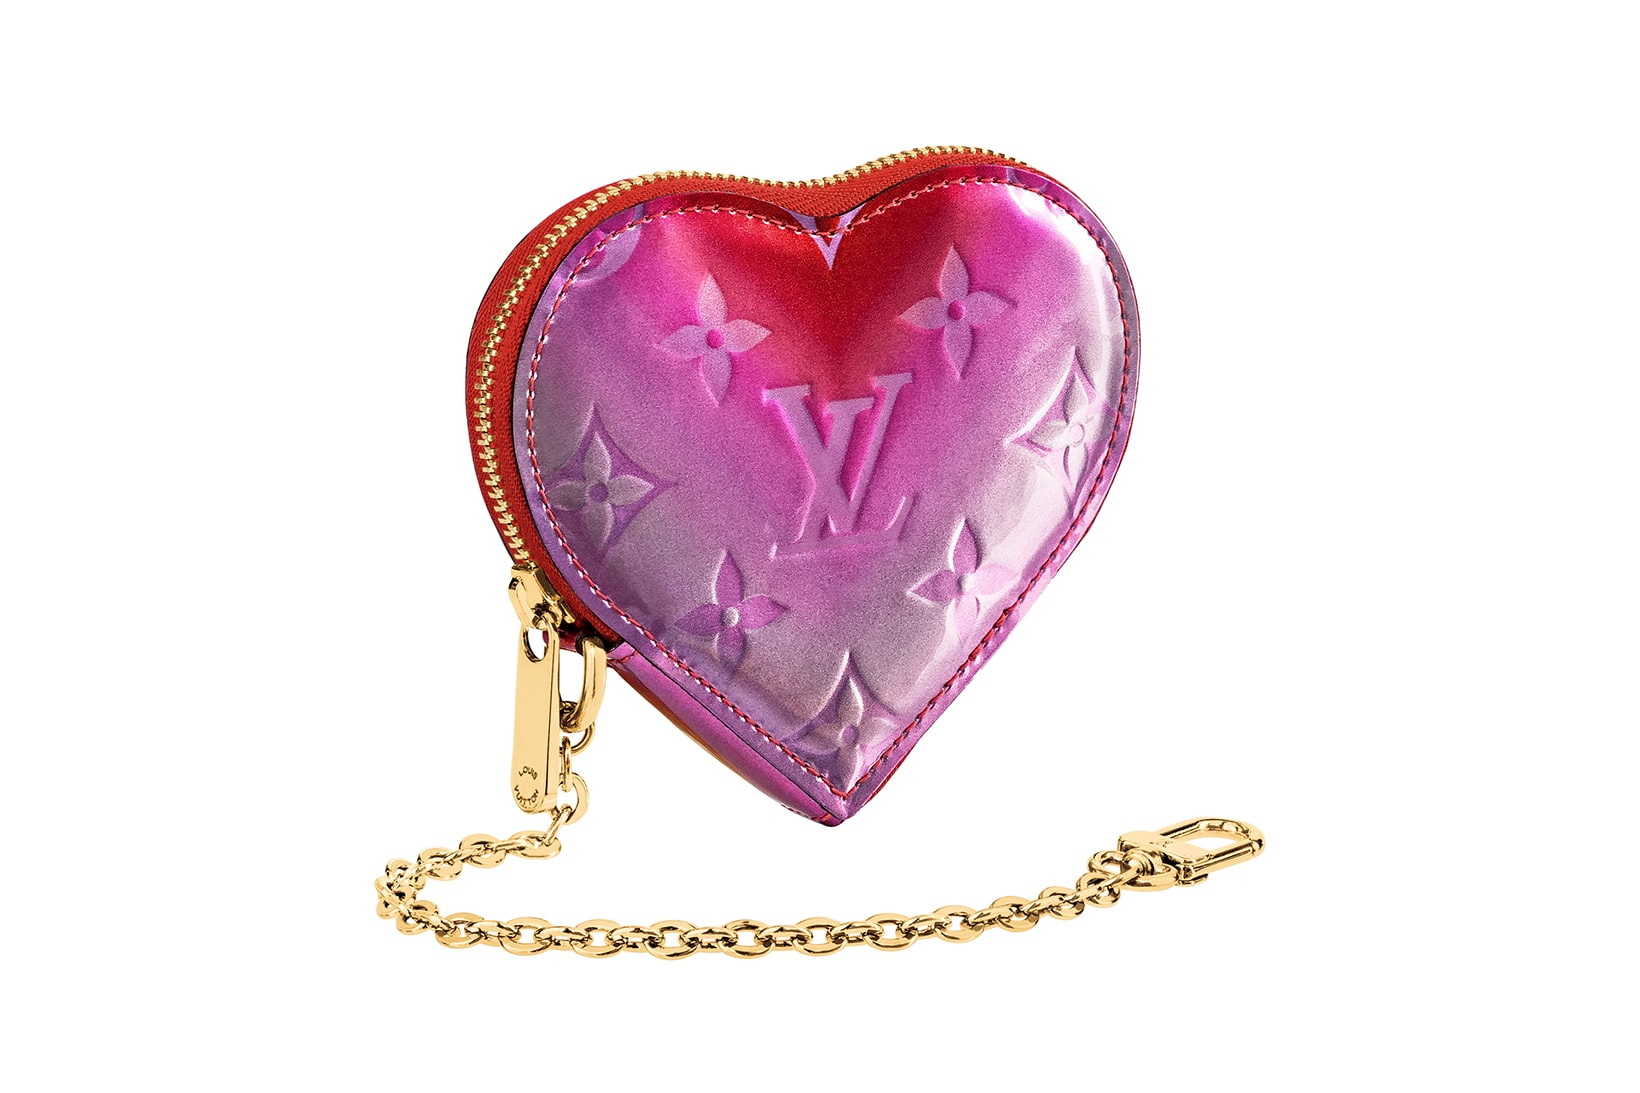 louis vuitton heart coin purse metallic pink red valentines day gold chain